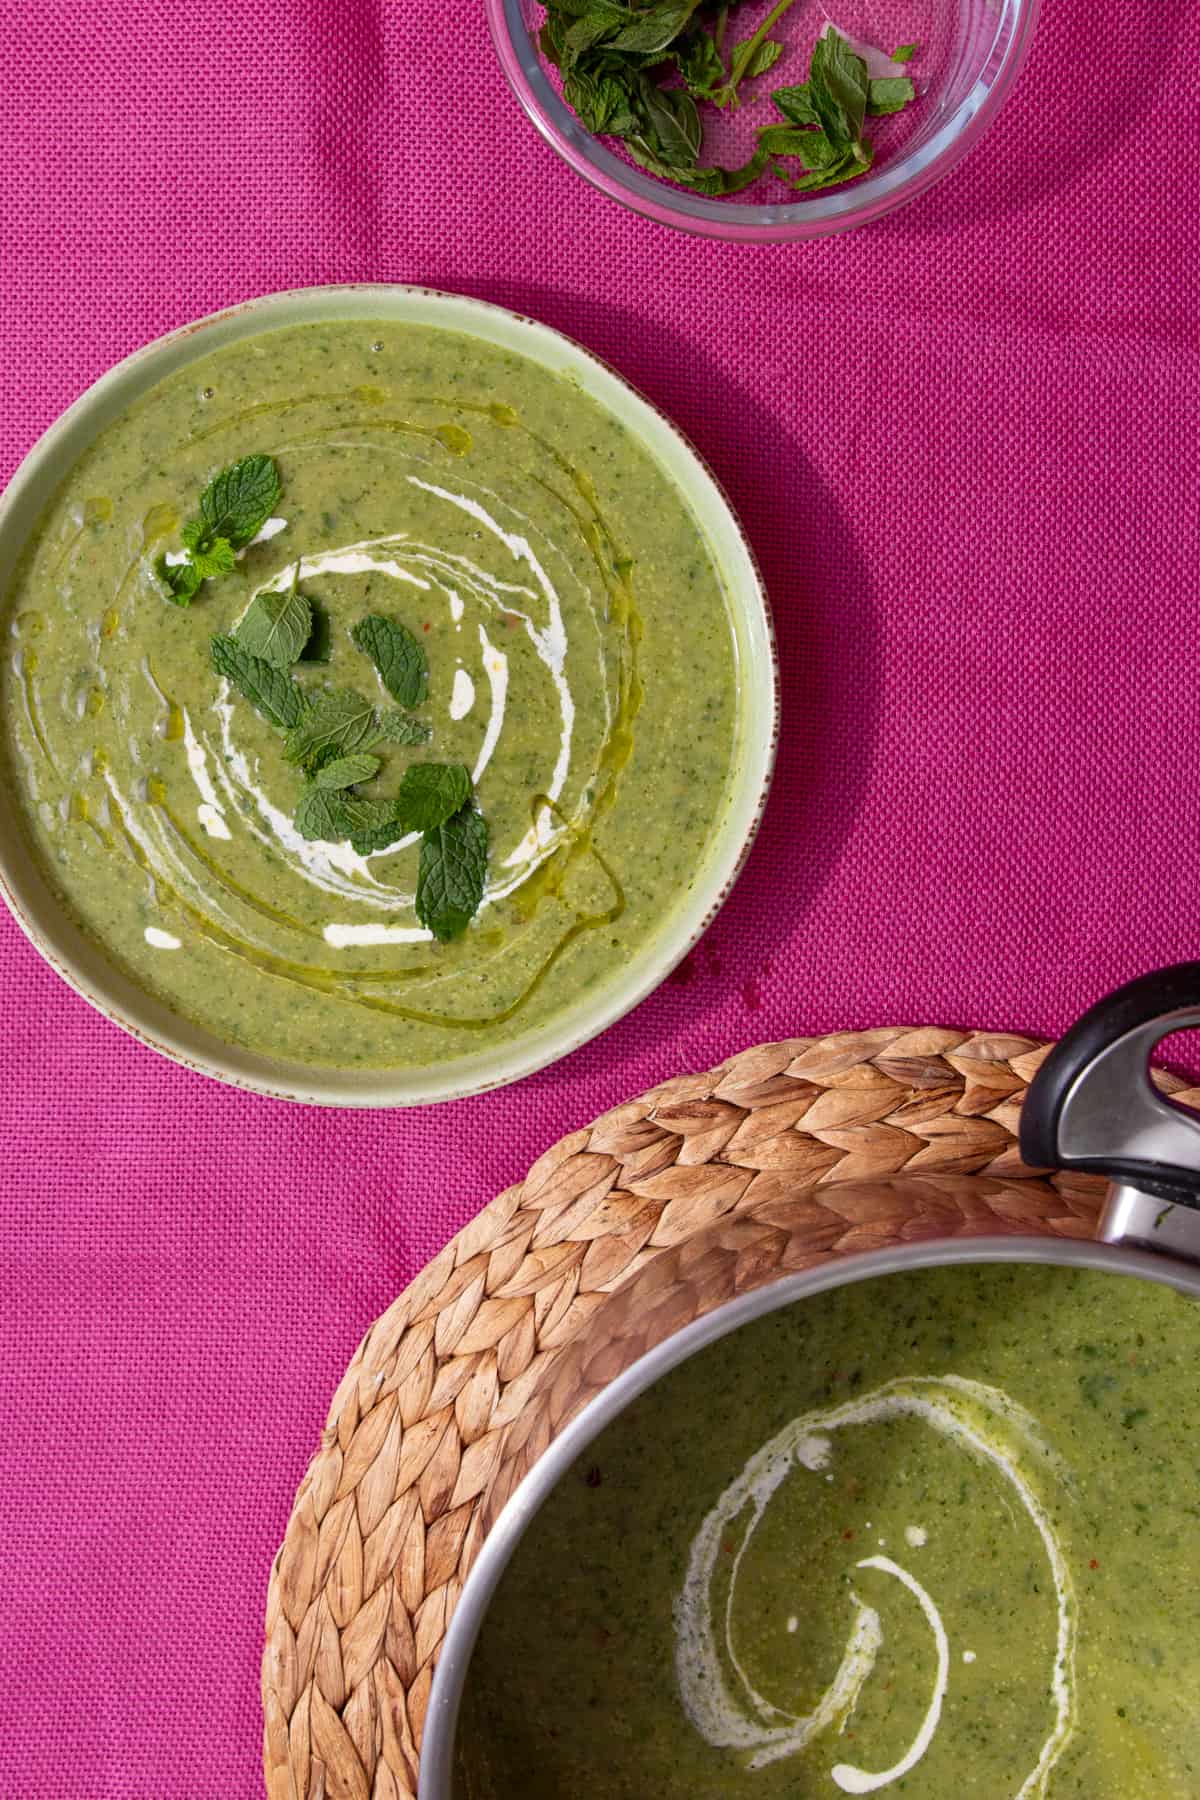 A bowl of courgette soup with a swirl of cream and topped with fresh mint leaves on a pink background with partial view of glass bowl with fresh mint and of the pan of soup on a woven mat.